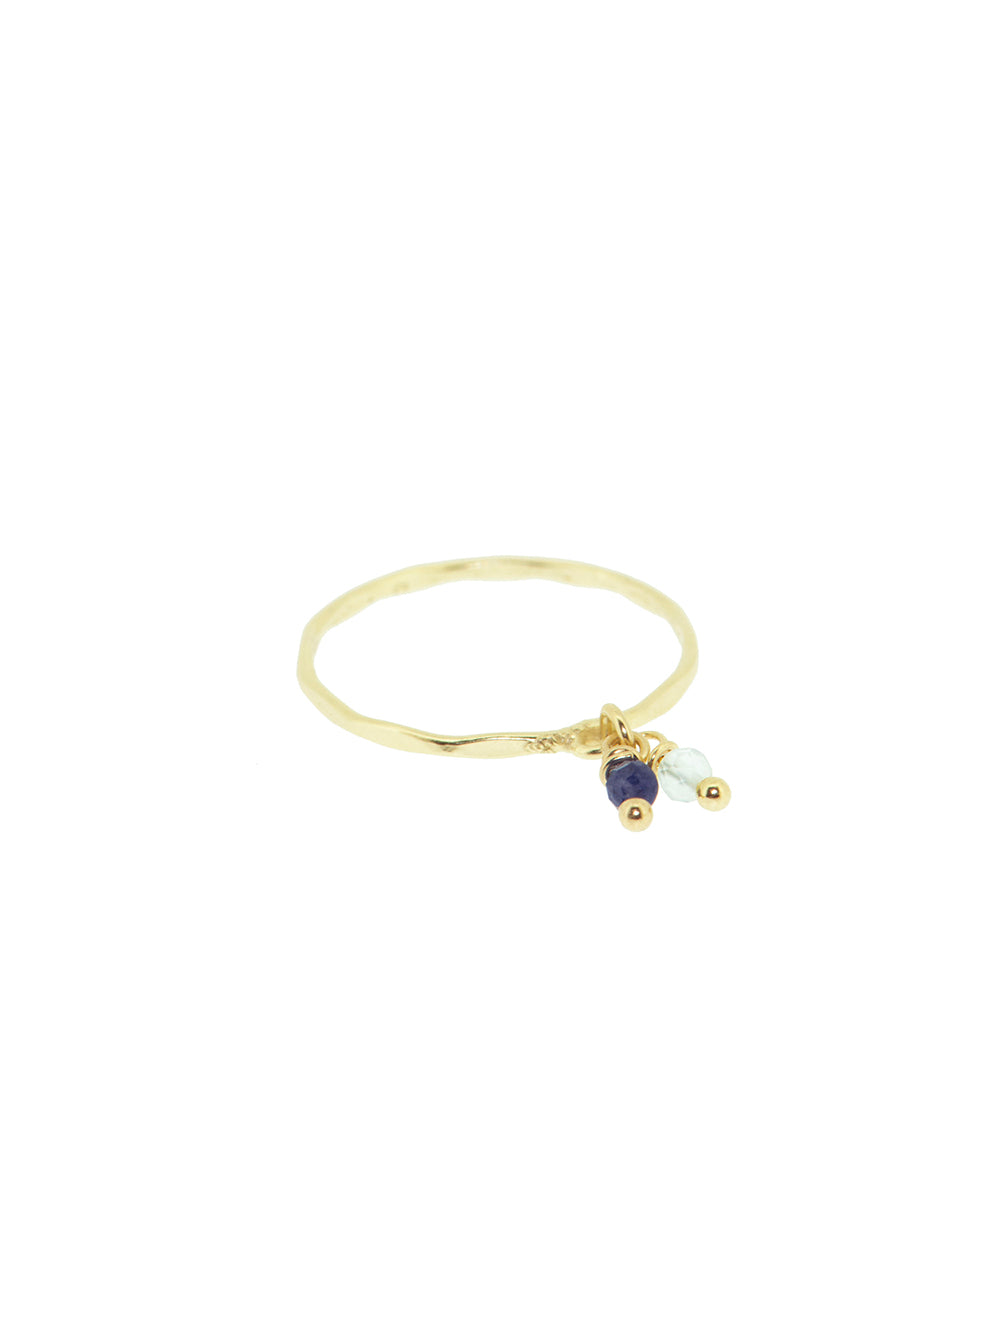 Birthstone ring May - Emerald | 14K Gold Plated